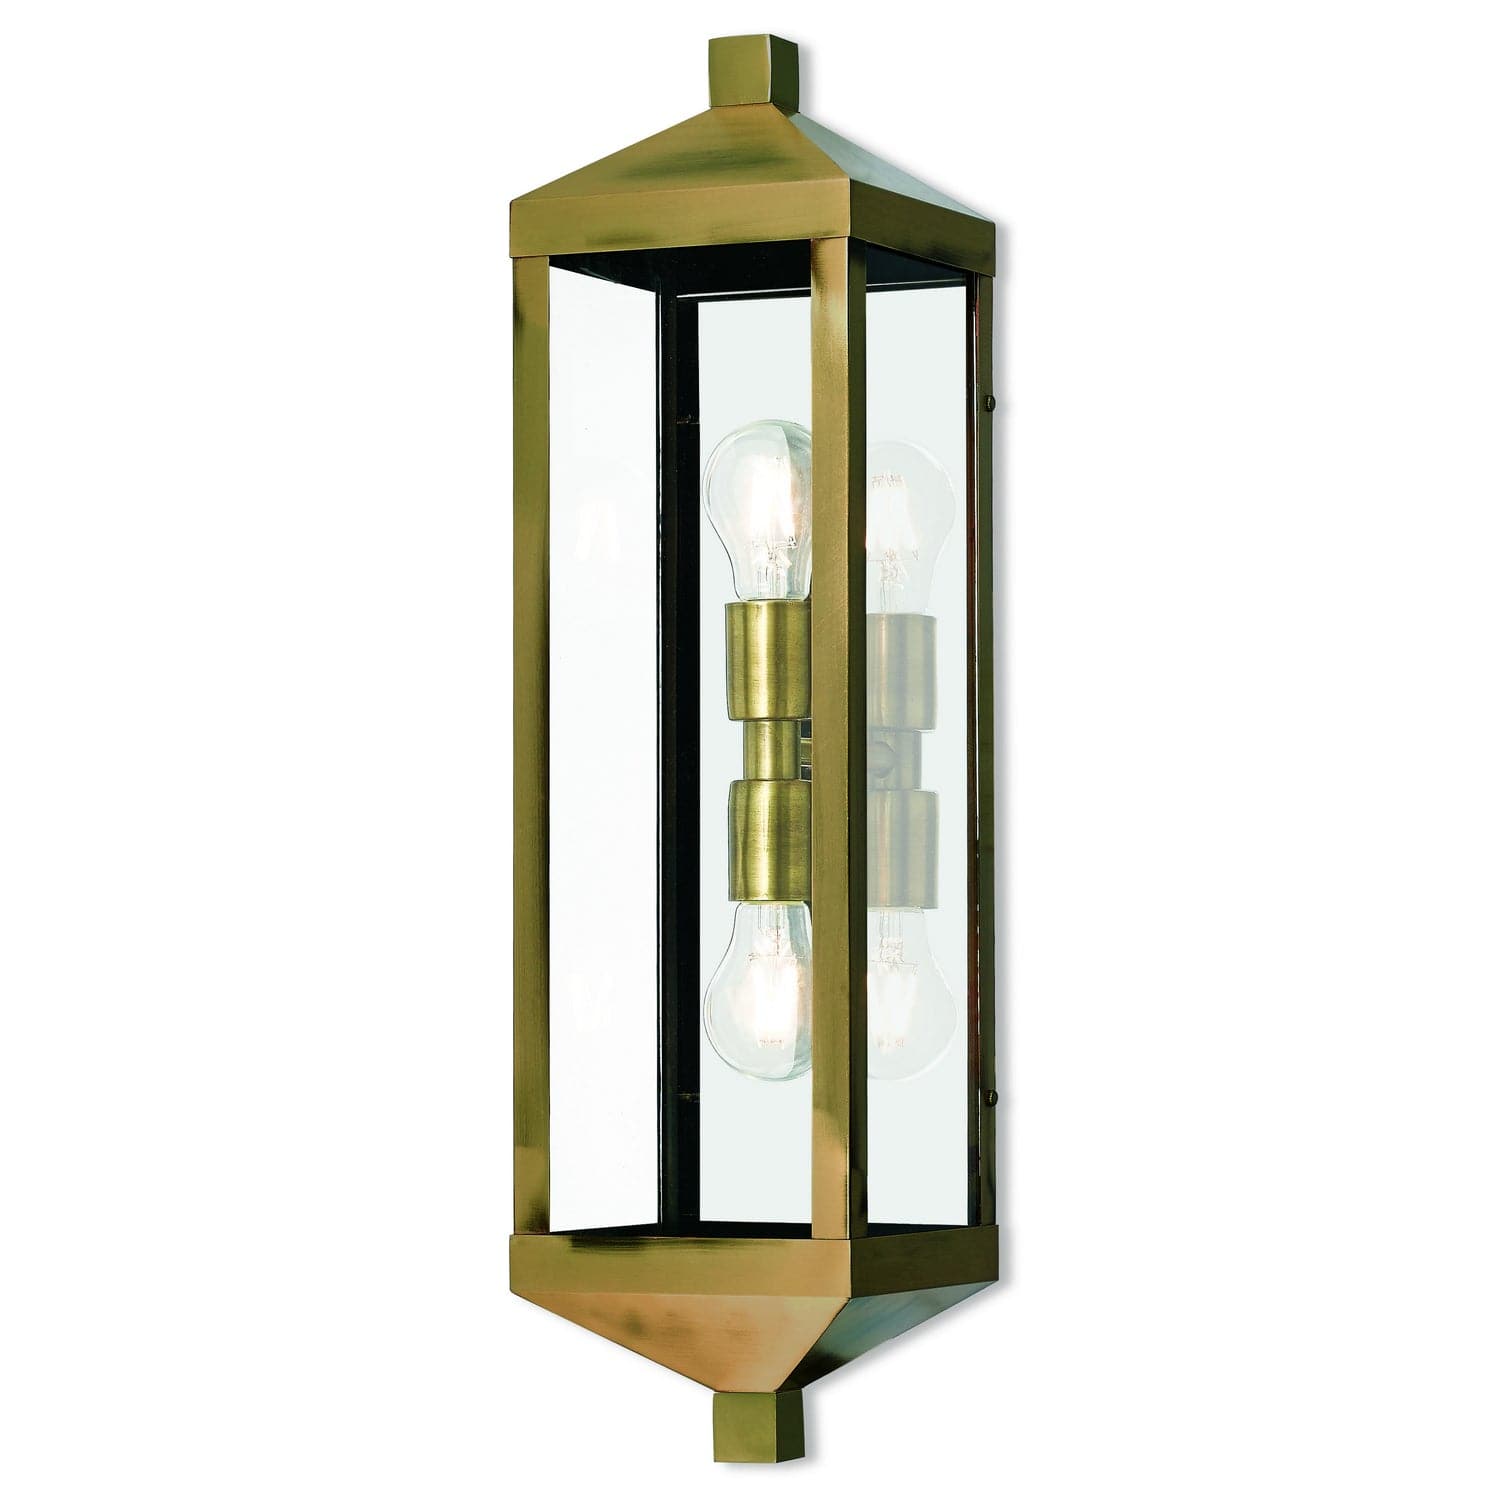 Livex Lighting - 20583-01 - Two Light Outdoor Wall Lantern - Nyack - Antique Brass w/ Polished Chrome Stainless Steel